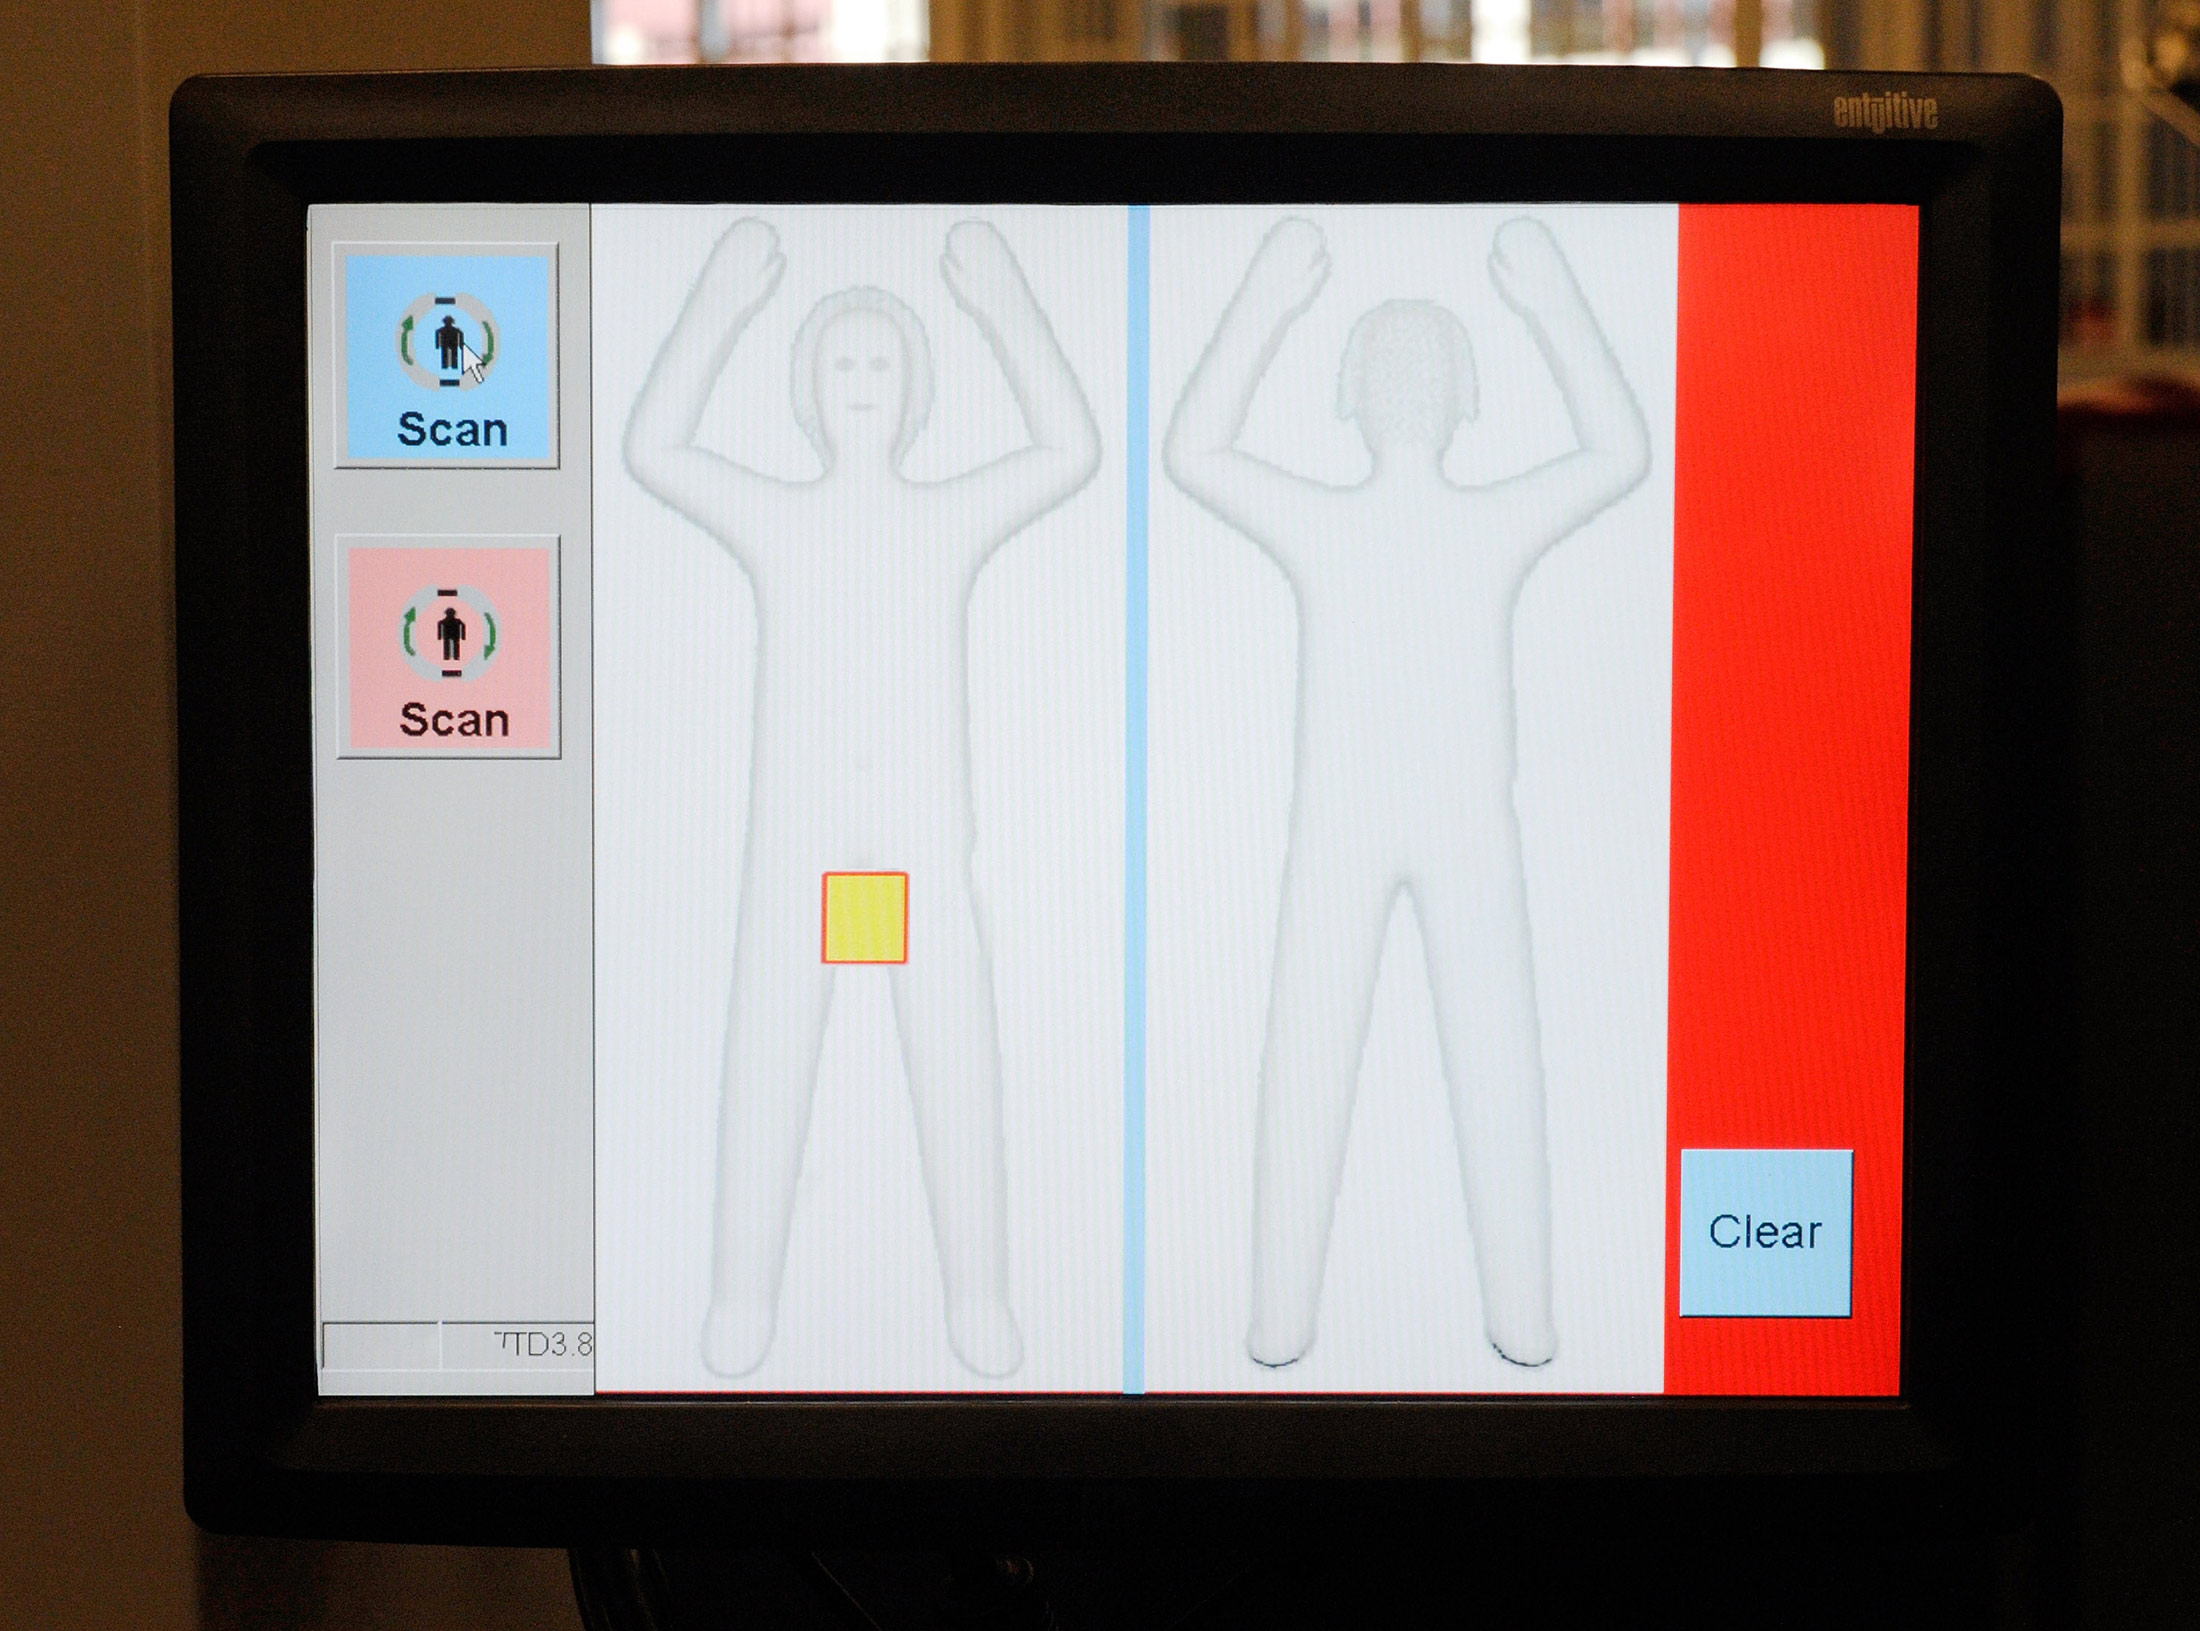 a screen with a person's body